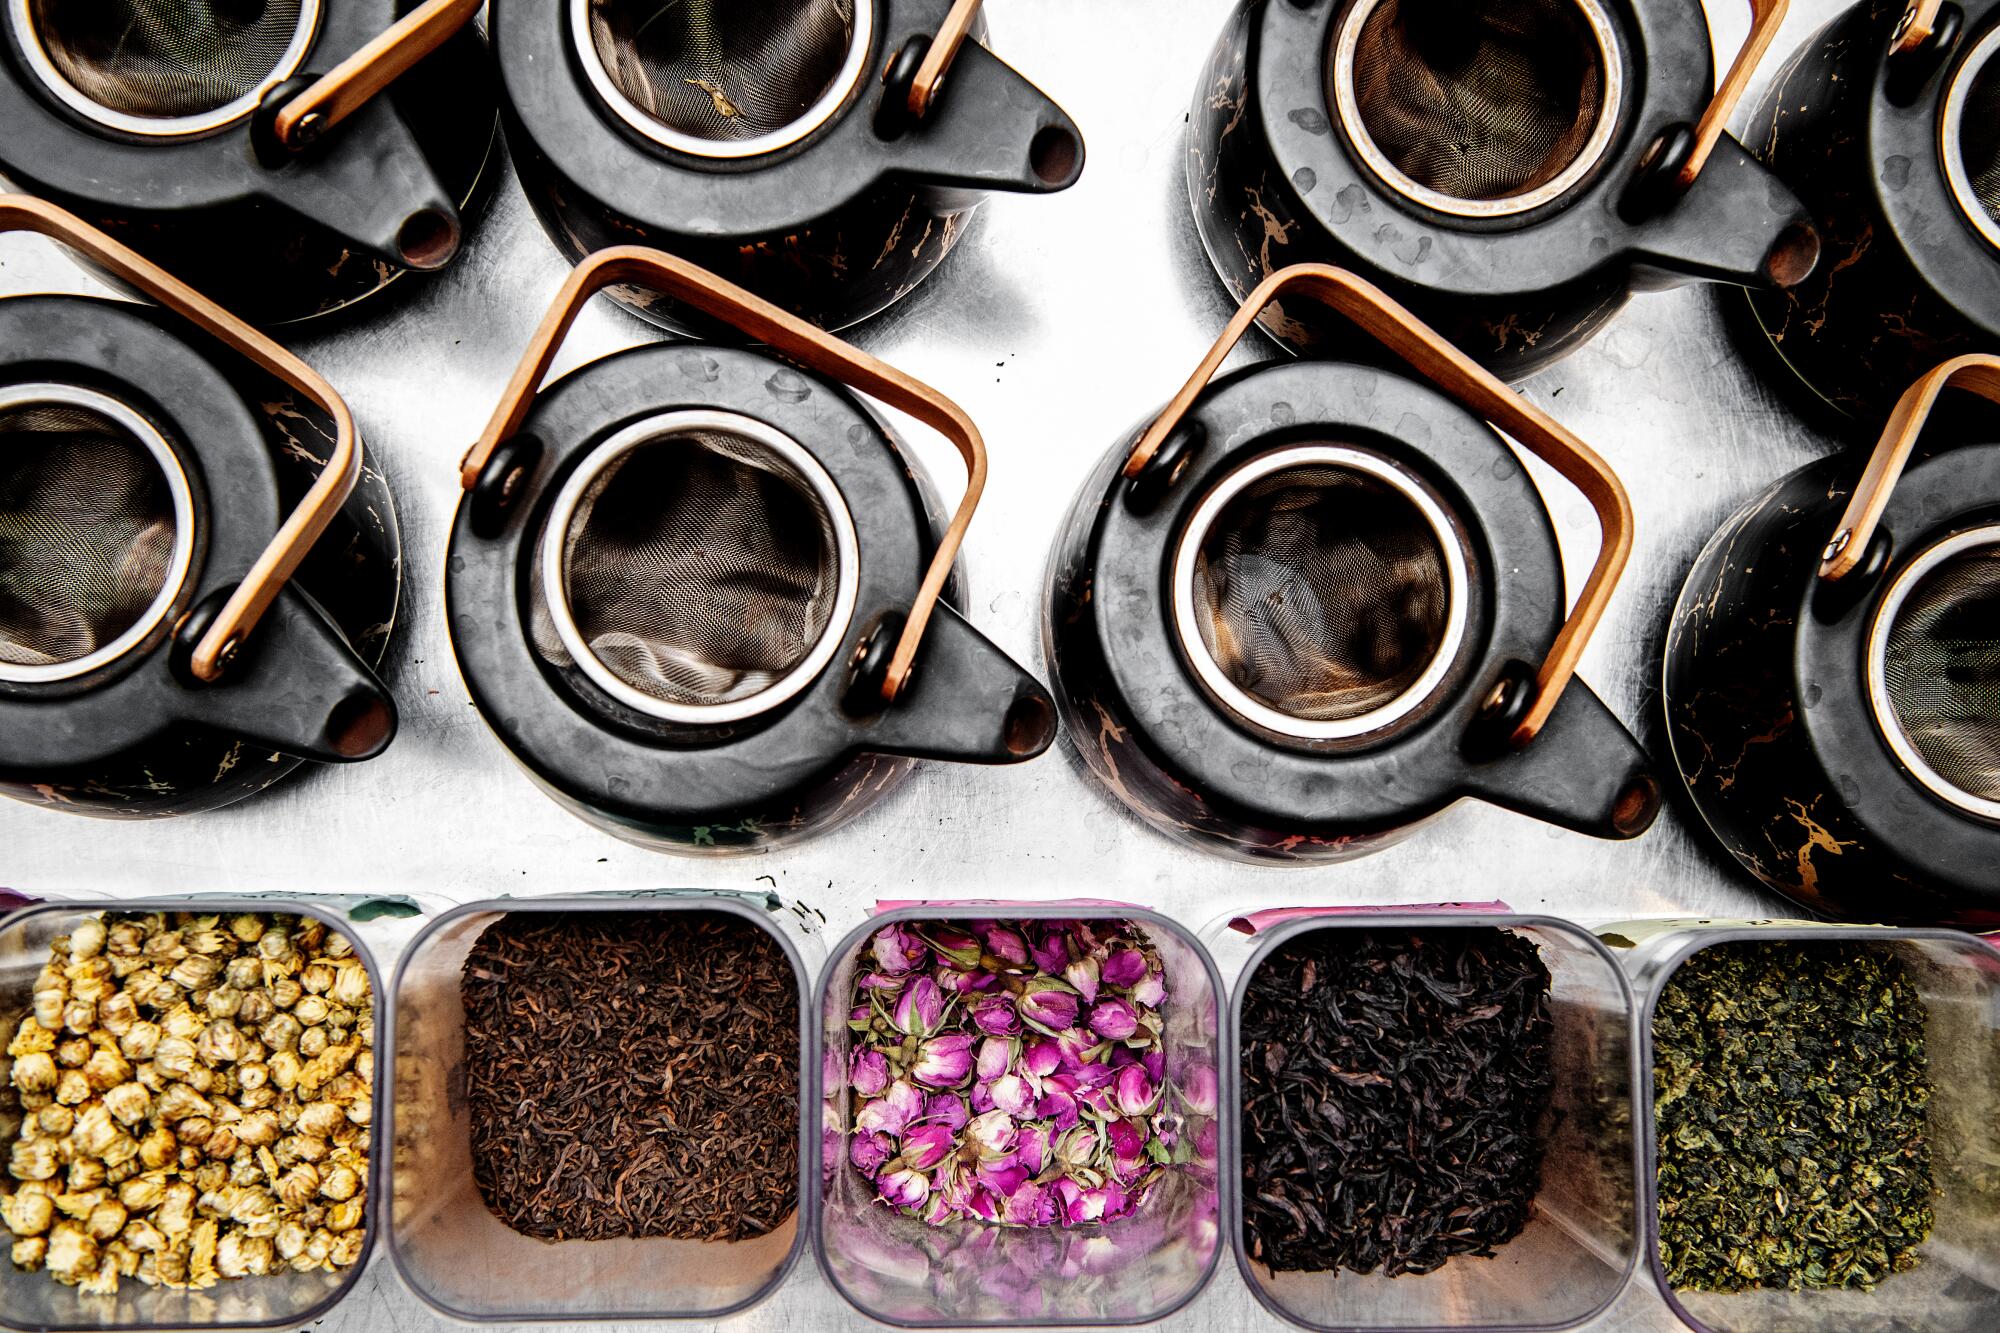 An overhead view of various teapots and boxes of loose-leaf tea.